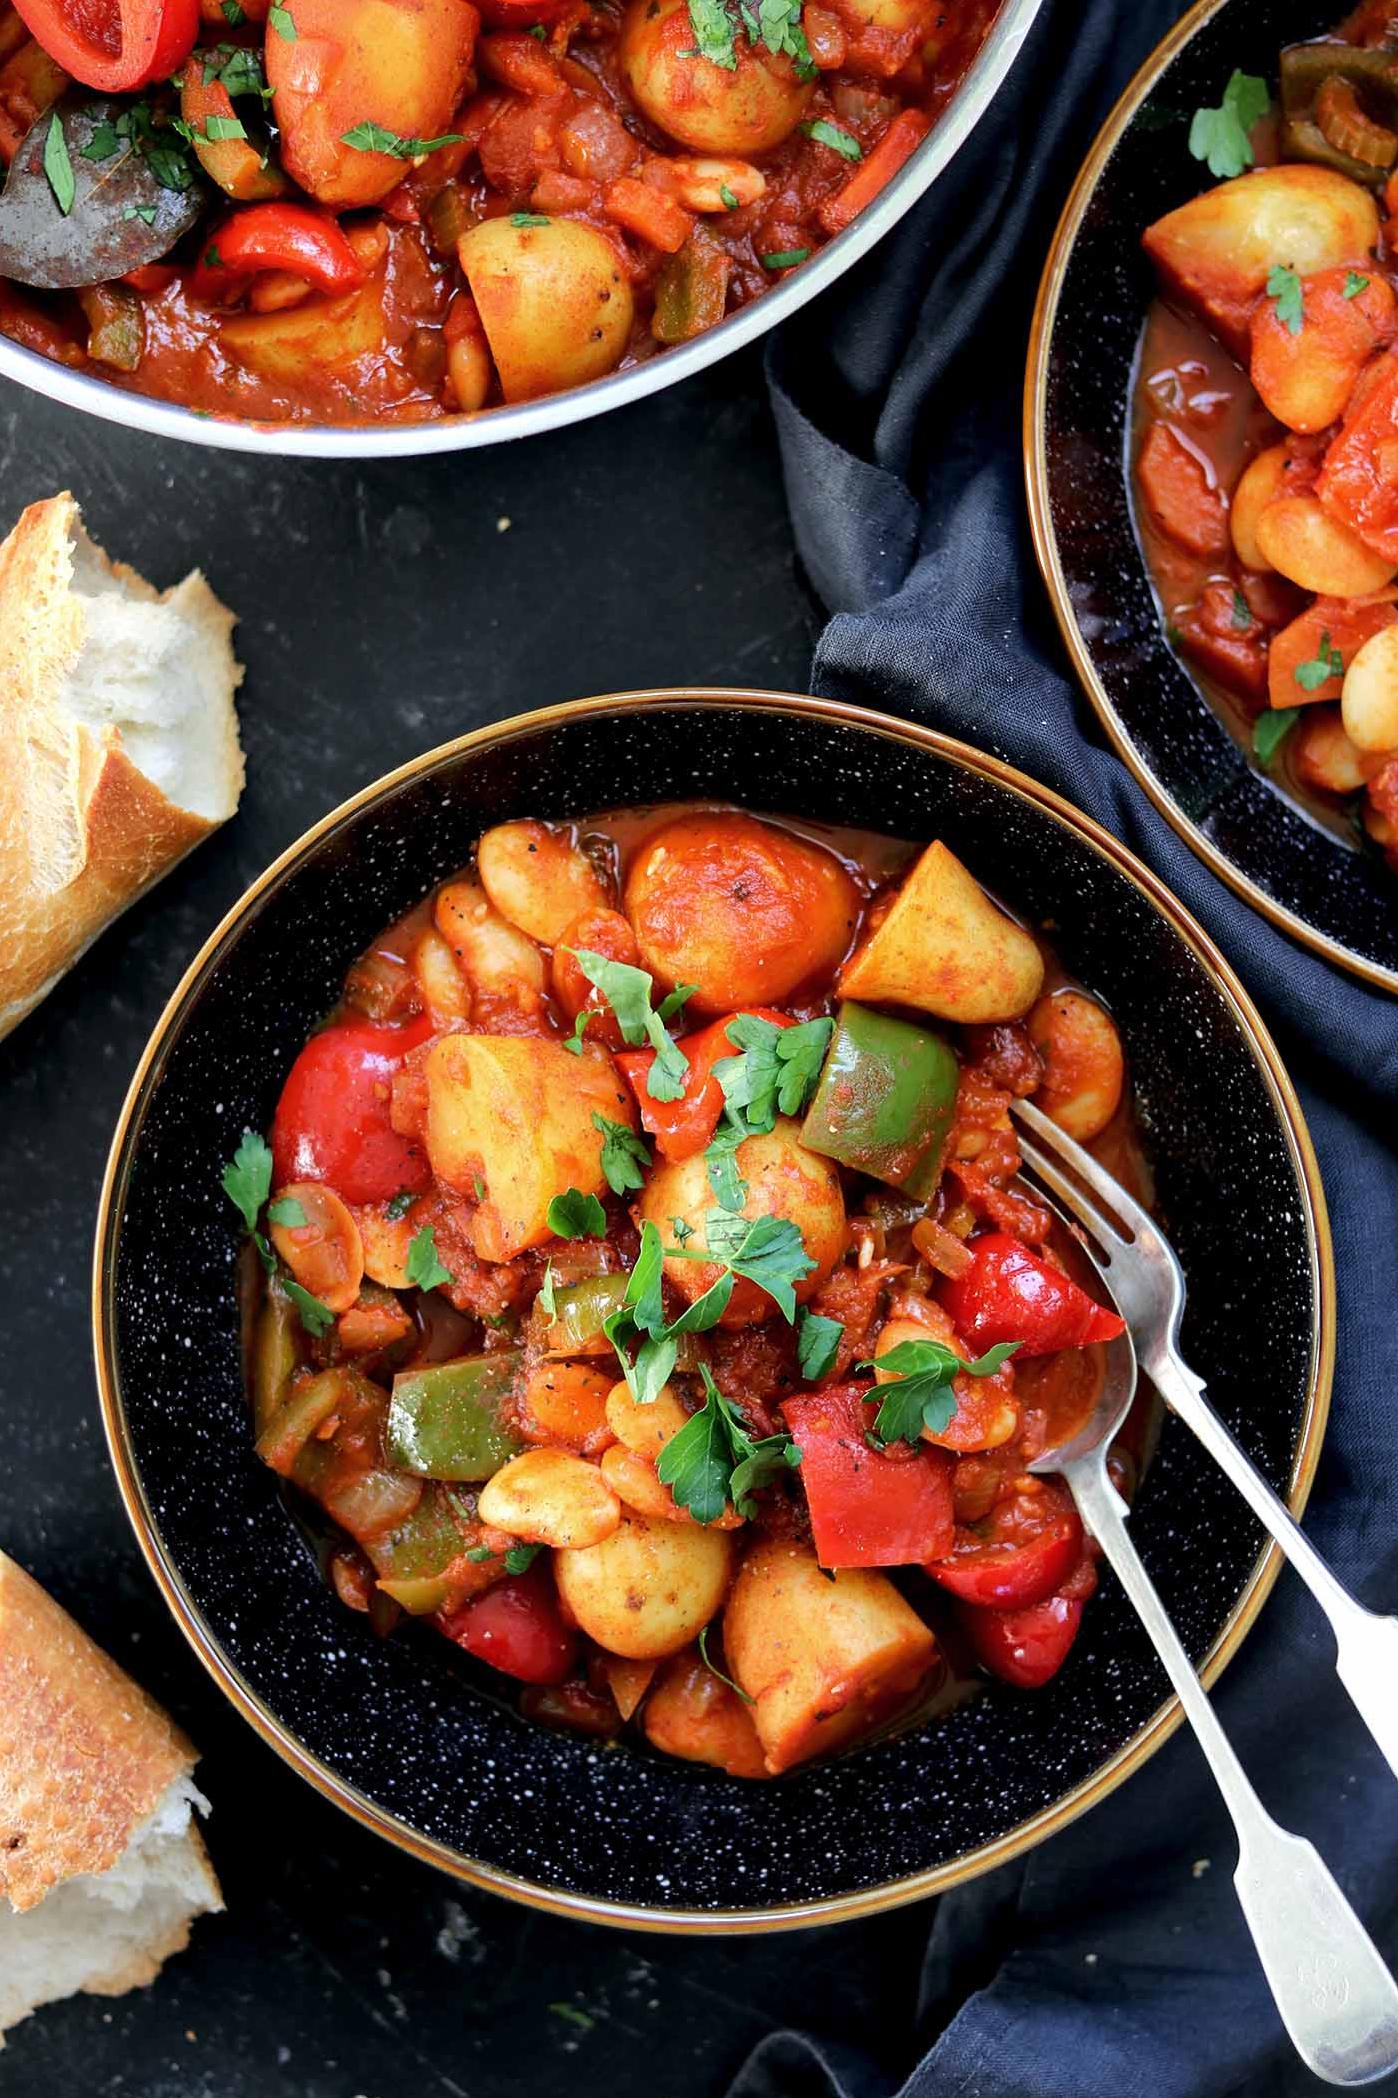  The mouth-watering aroma will fill your kitchen when you cook this vegetarian goulash.